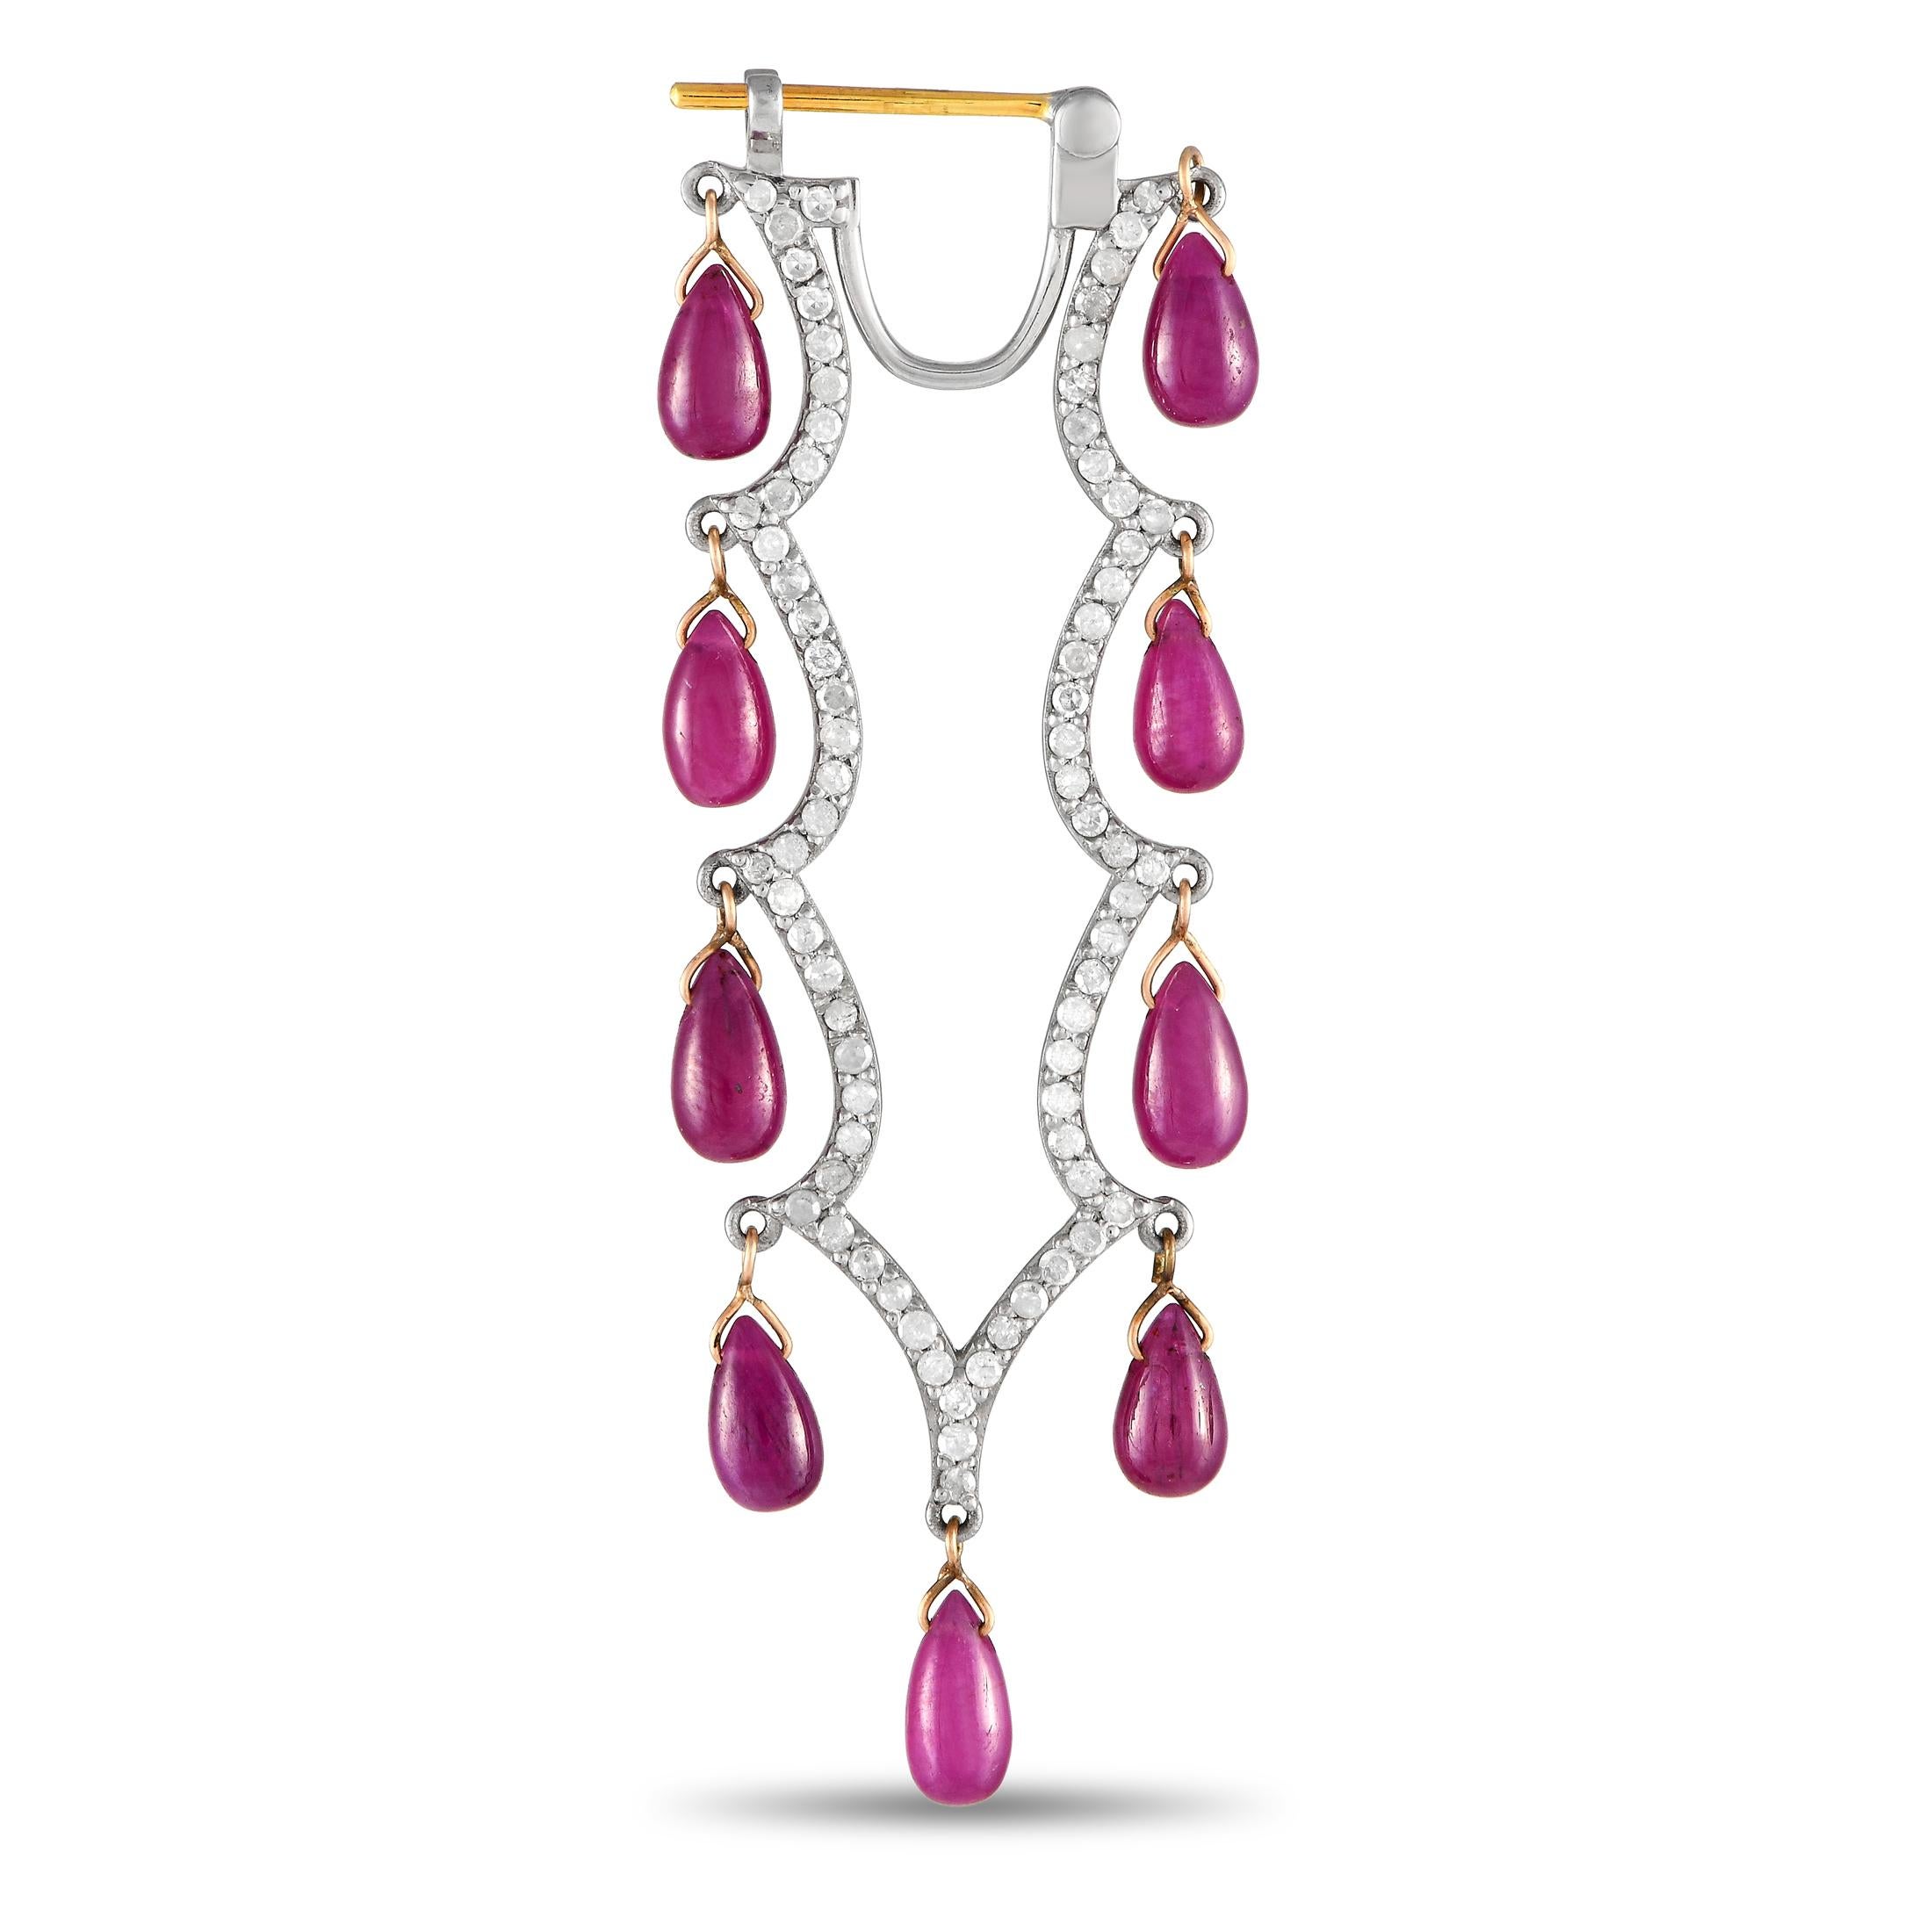 These dramatic earrings are exquisite from every angle. Opulent 14K Yellow Gold and Silver are beautifully juxtaposed on each earring, creating a subtle two-toned design. Pear-cut Ruby gemstones with a total weight of 15.20 carats dangle gracefully